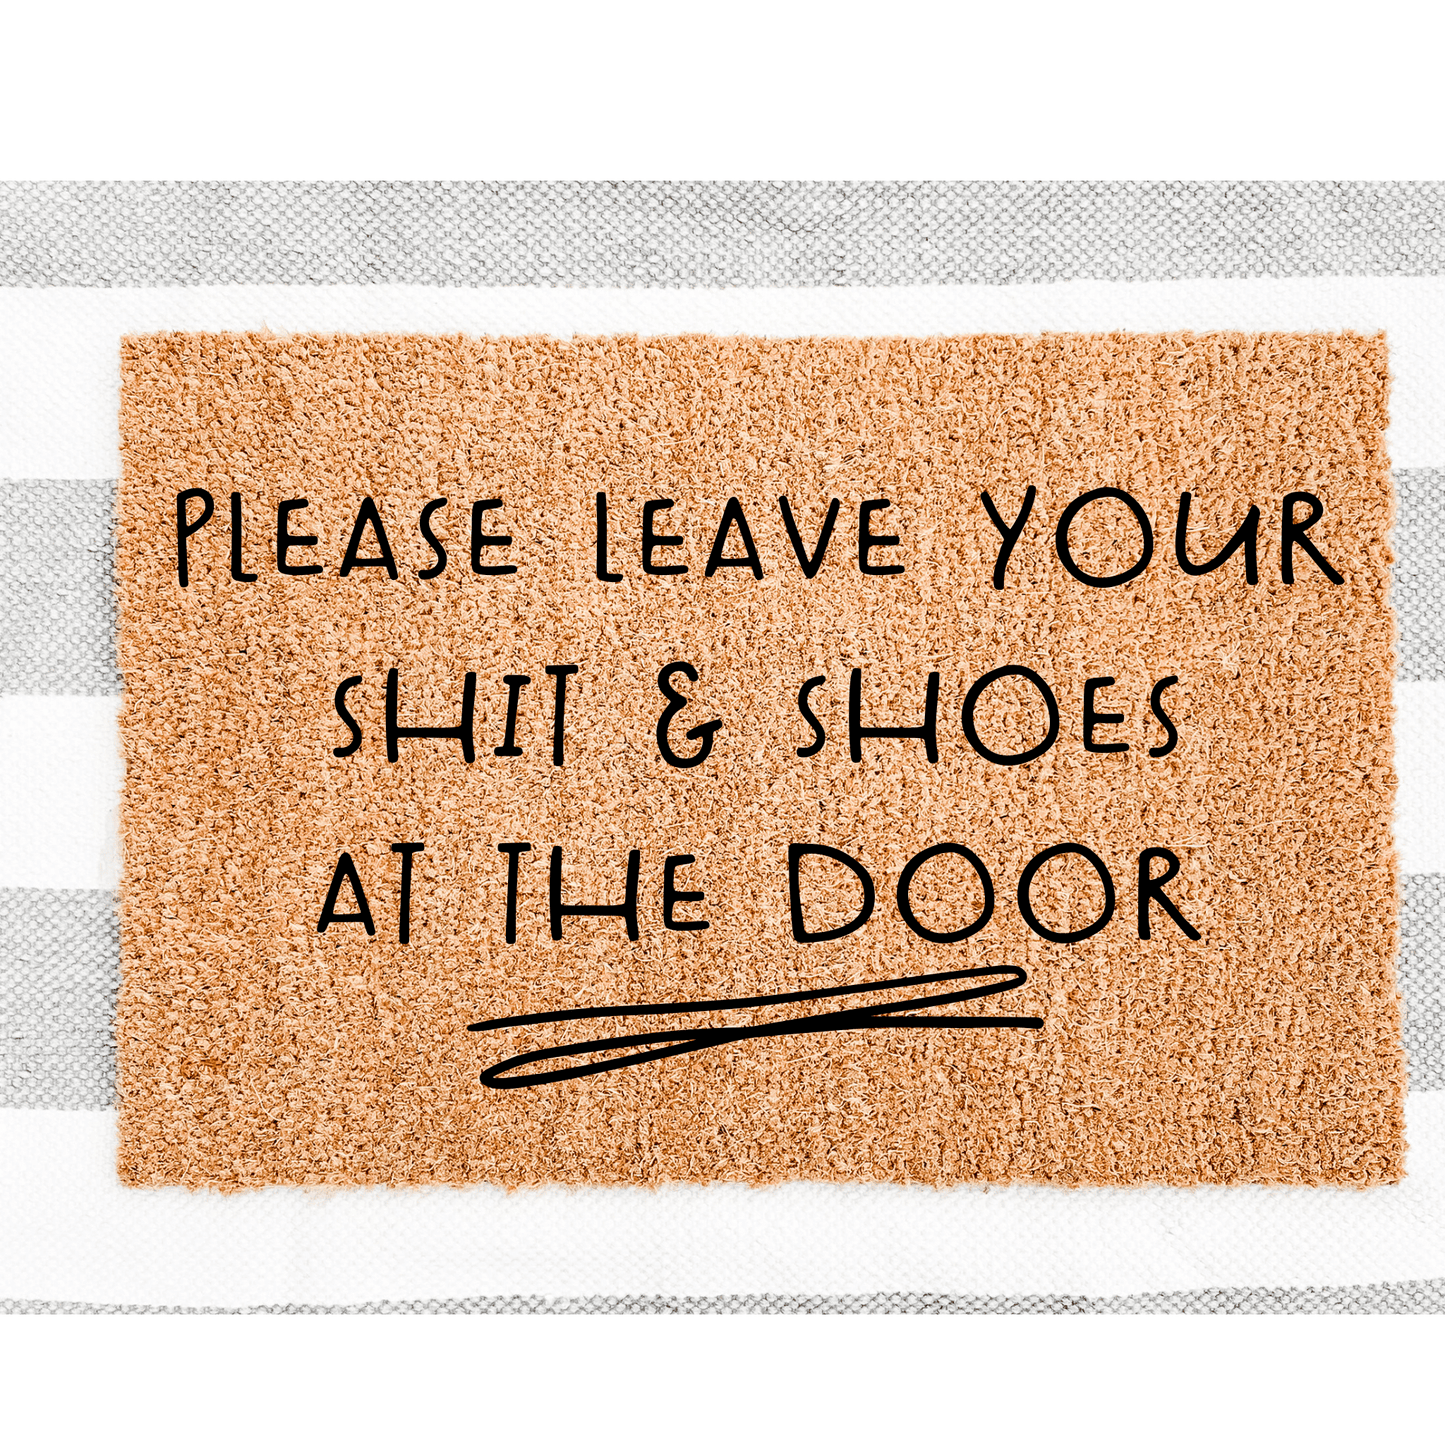 Please leave your shit and shoes at the door front doormat - Personalised Doormat Australia